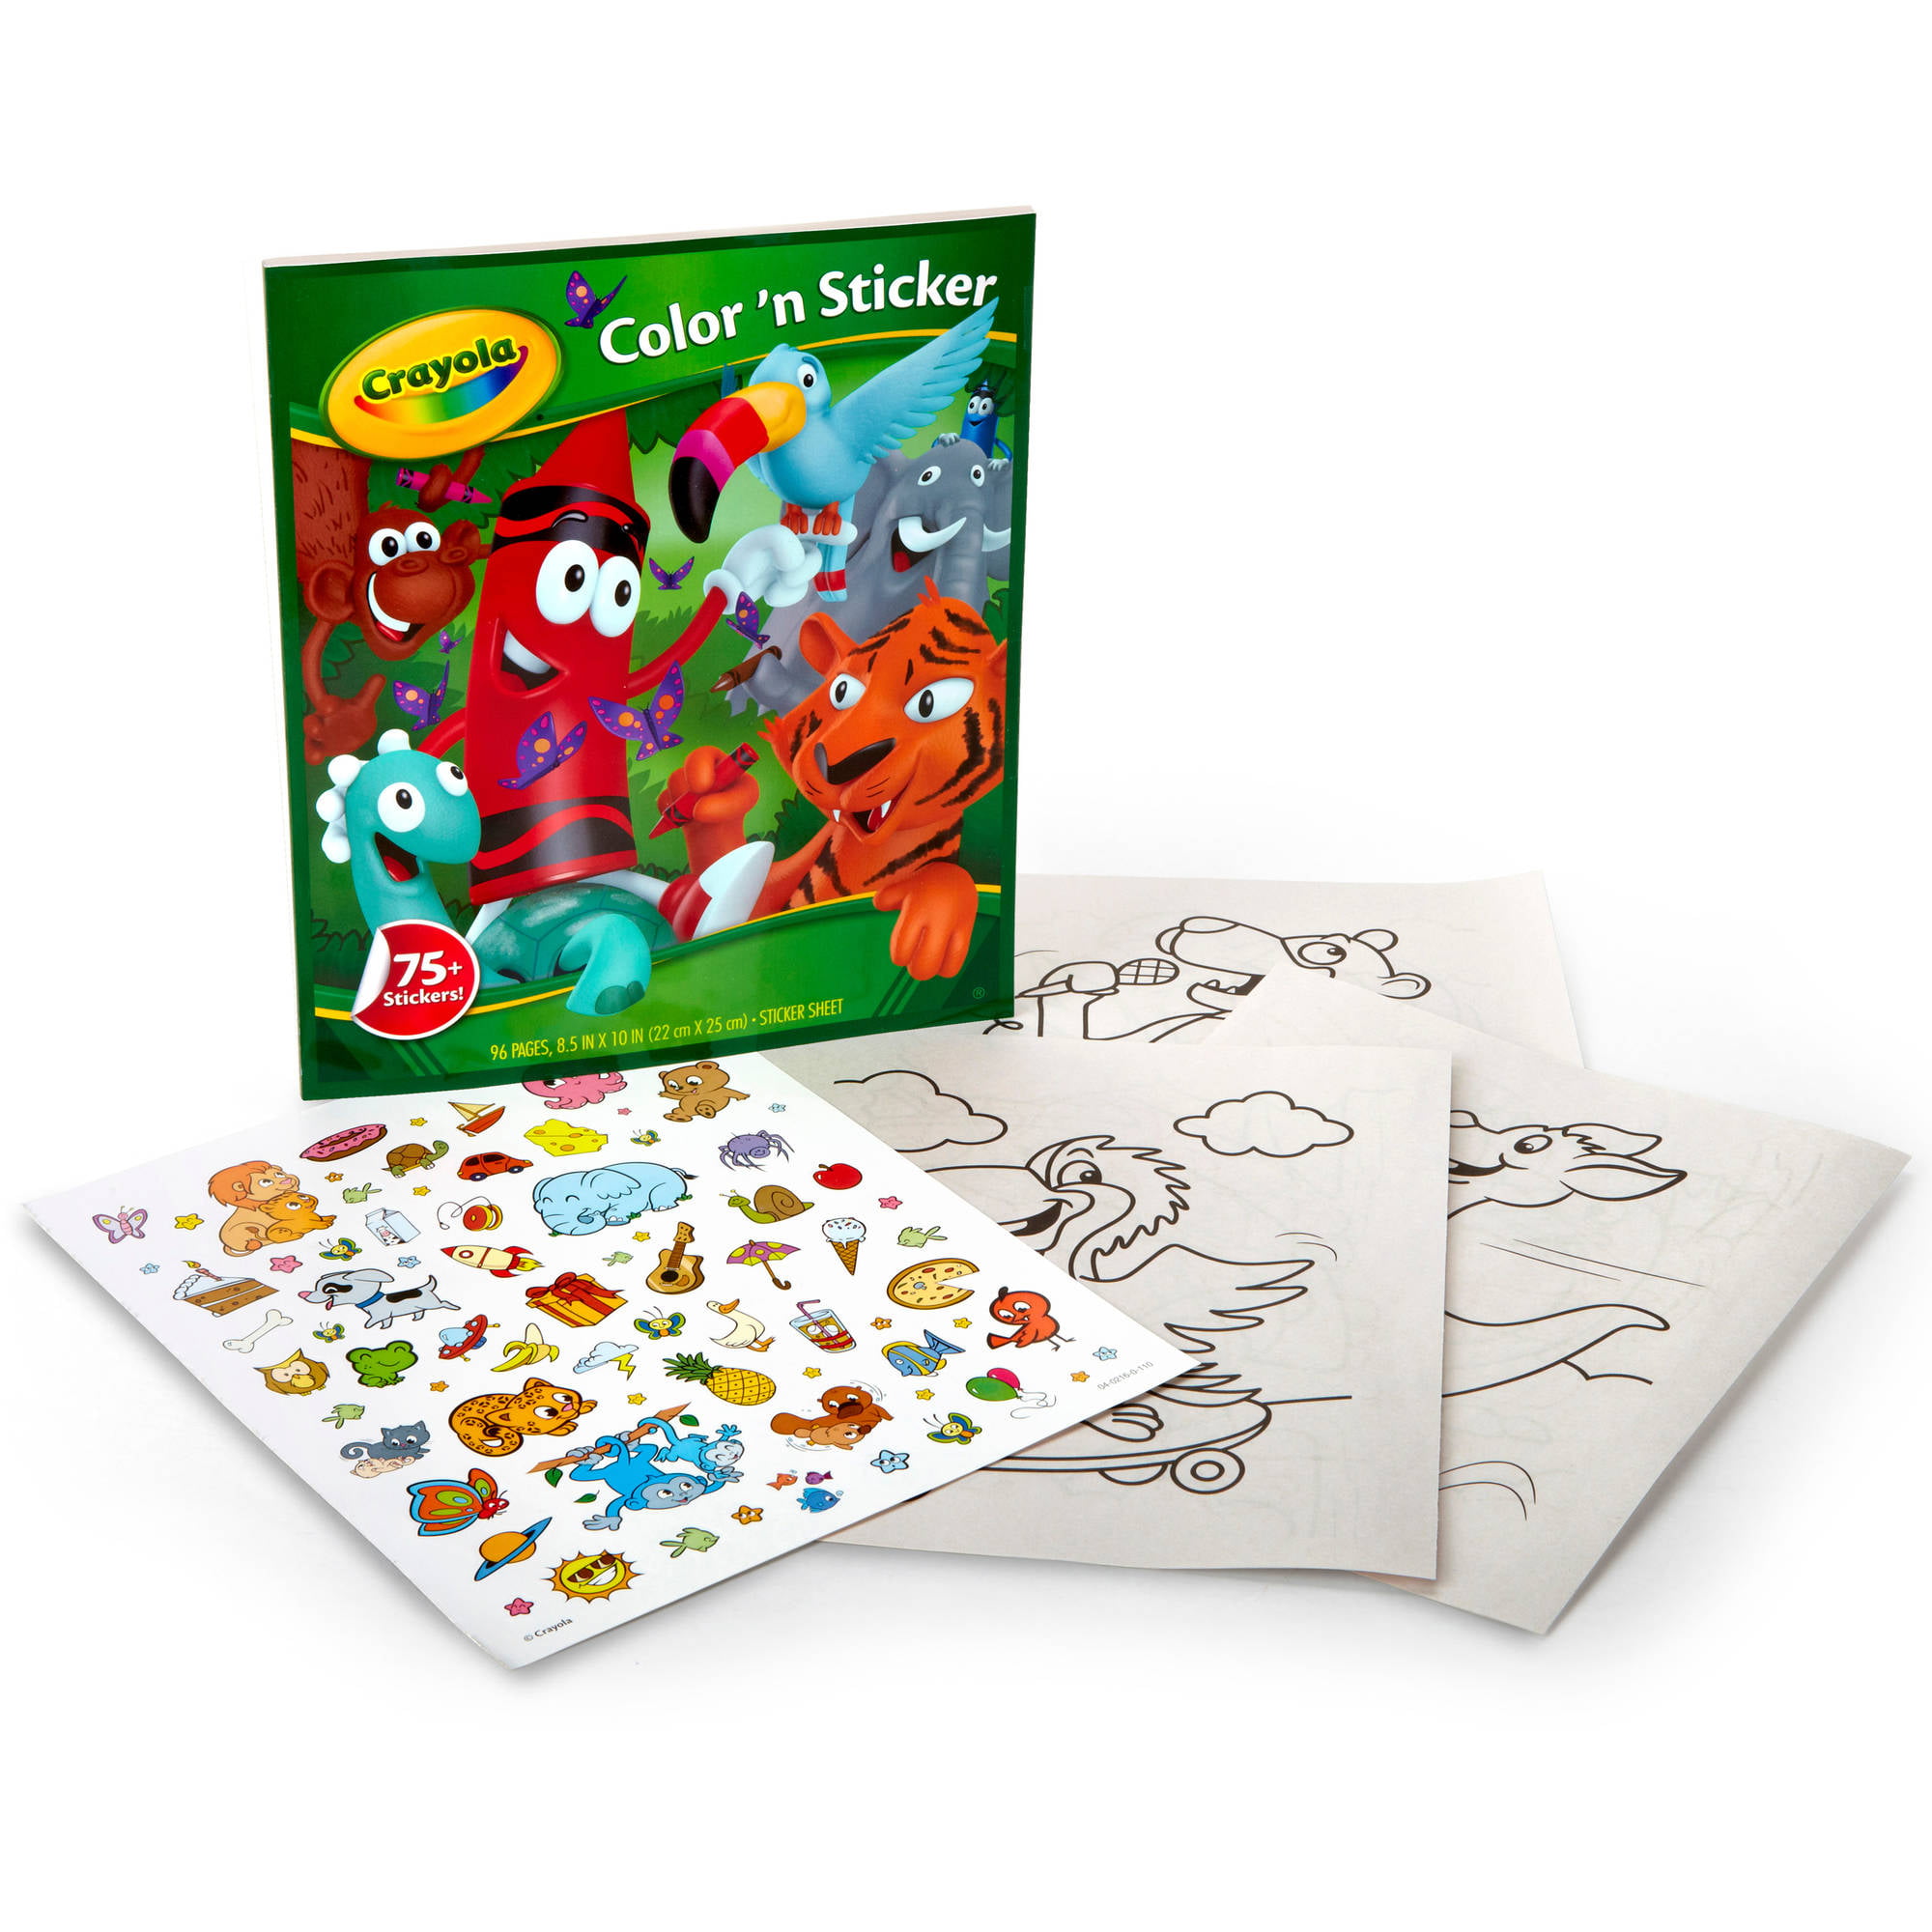 Download Crayola Jungle Animal Coloring Book With 50 Stickers Gift For Kids 96 Pages Walmart Com Walmart Com